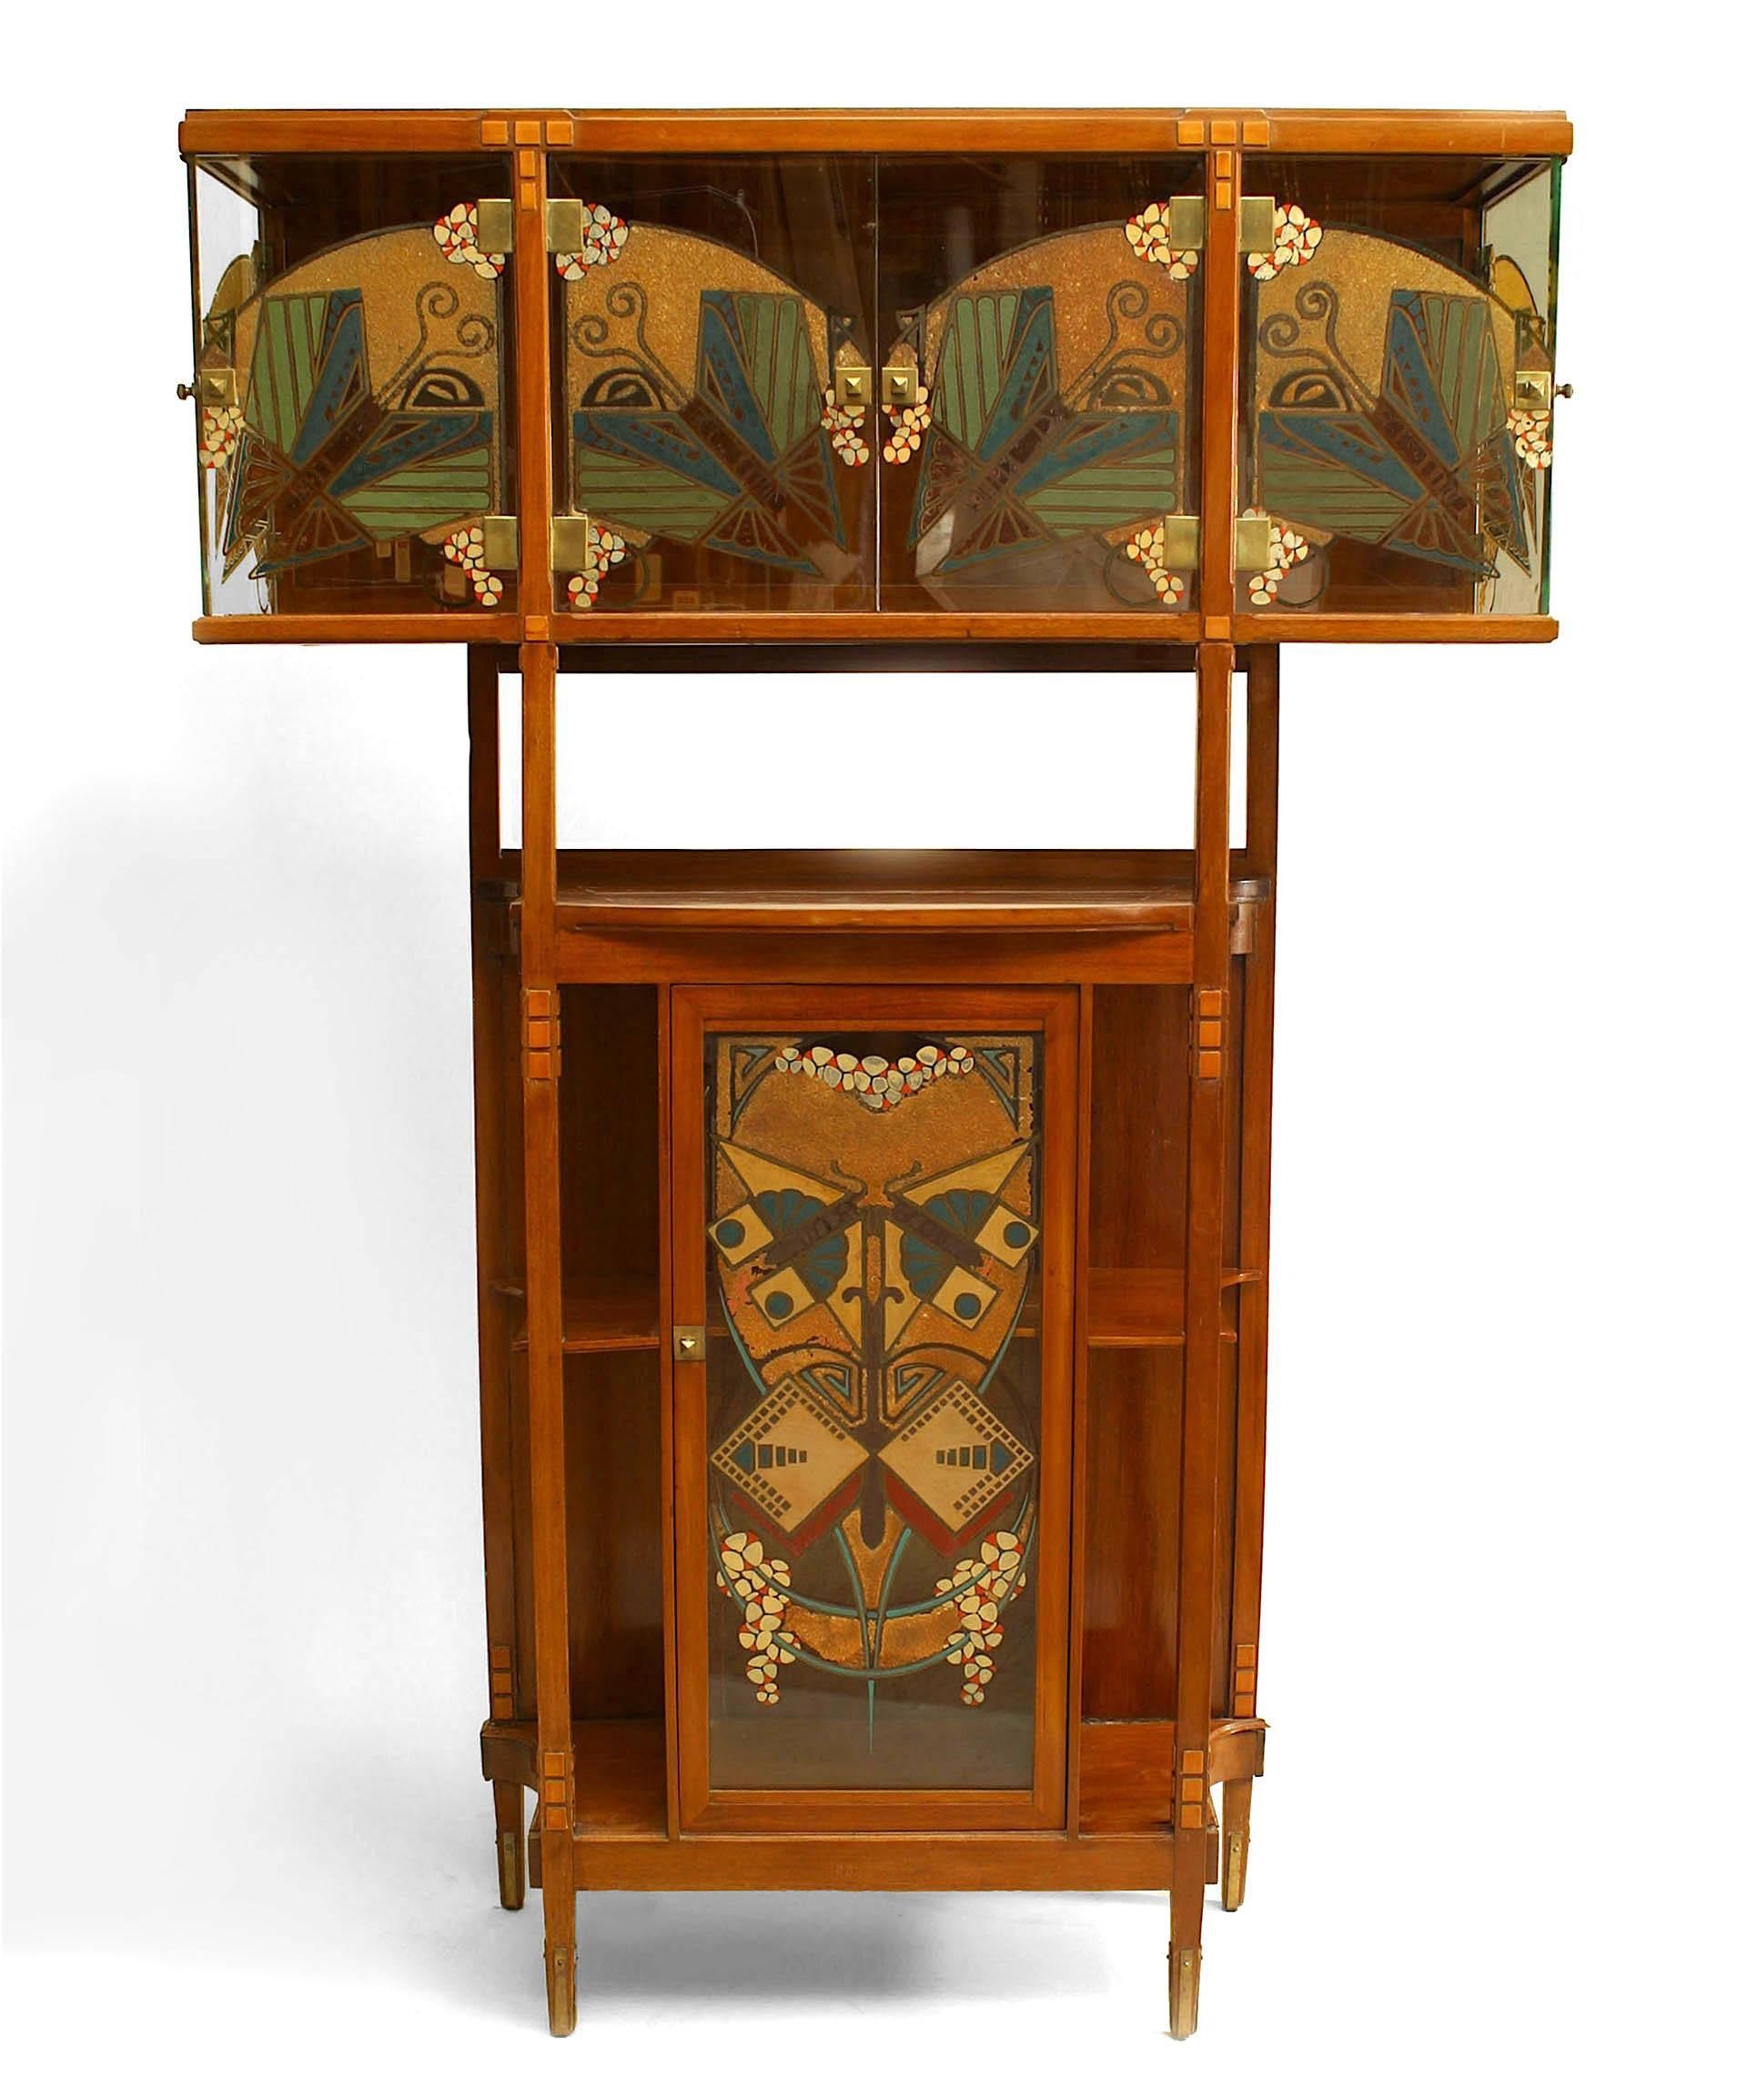 Continental Hungarian Secessionist mahogany and maple cabinet with side shelves and upper section with geometric painted glass door panels.
